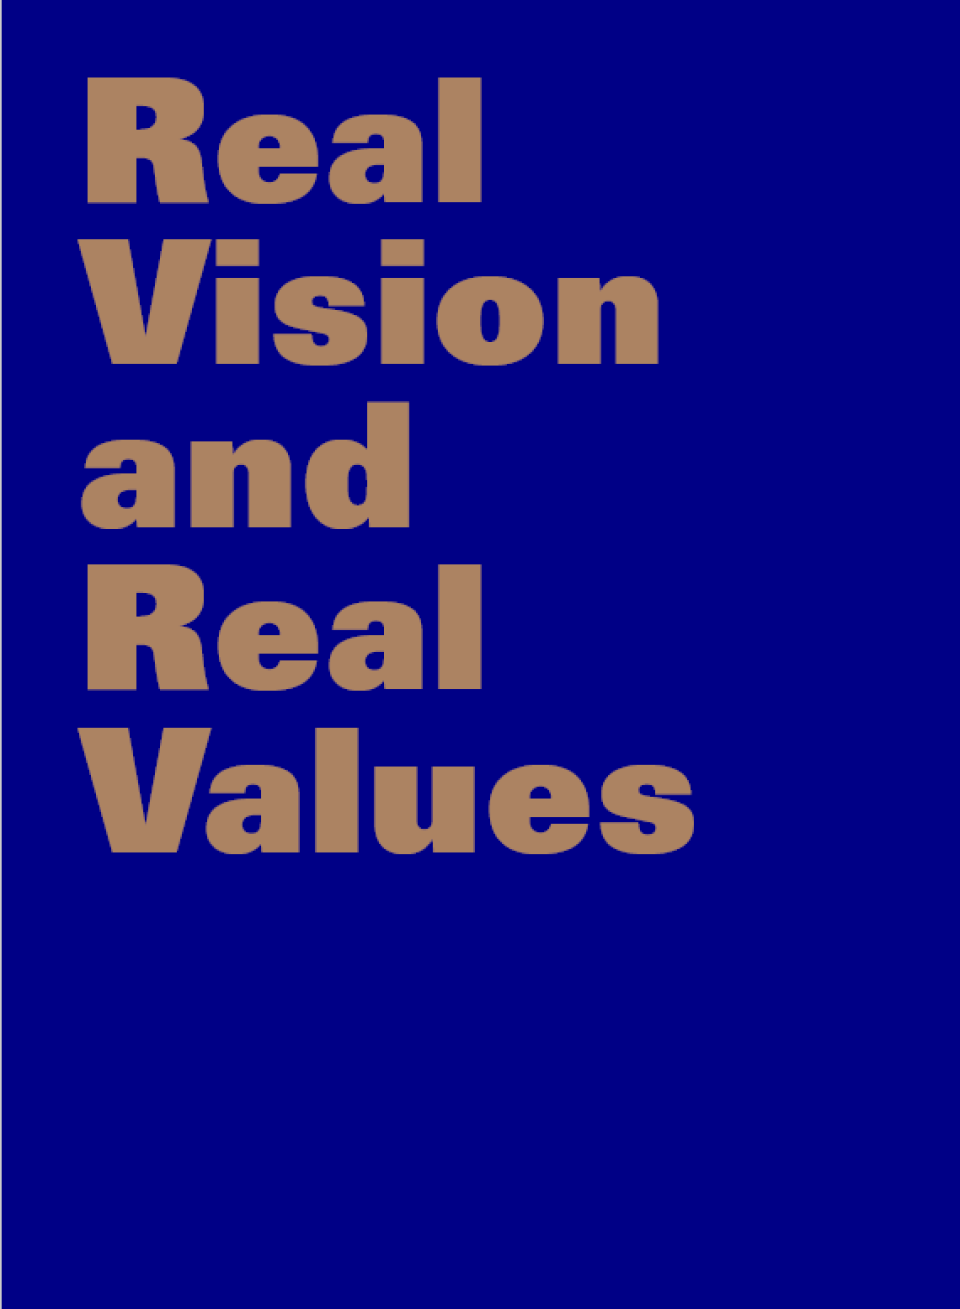 Book cover with book title - Real Vision and Real Values